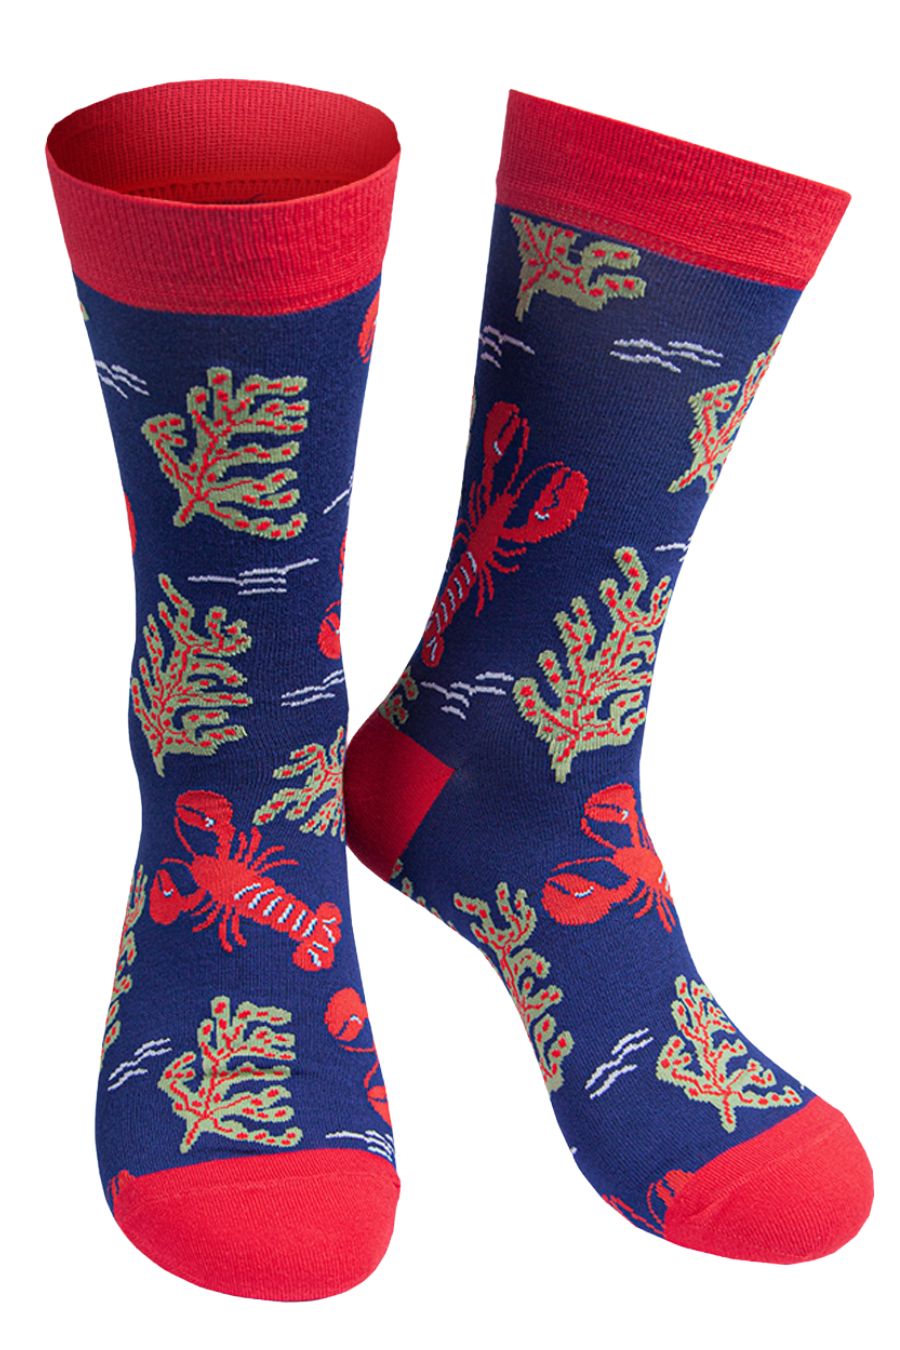 blue and red bamboo socks artistically designed to look like an underwater scene, with red lobsters and seaweed